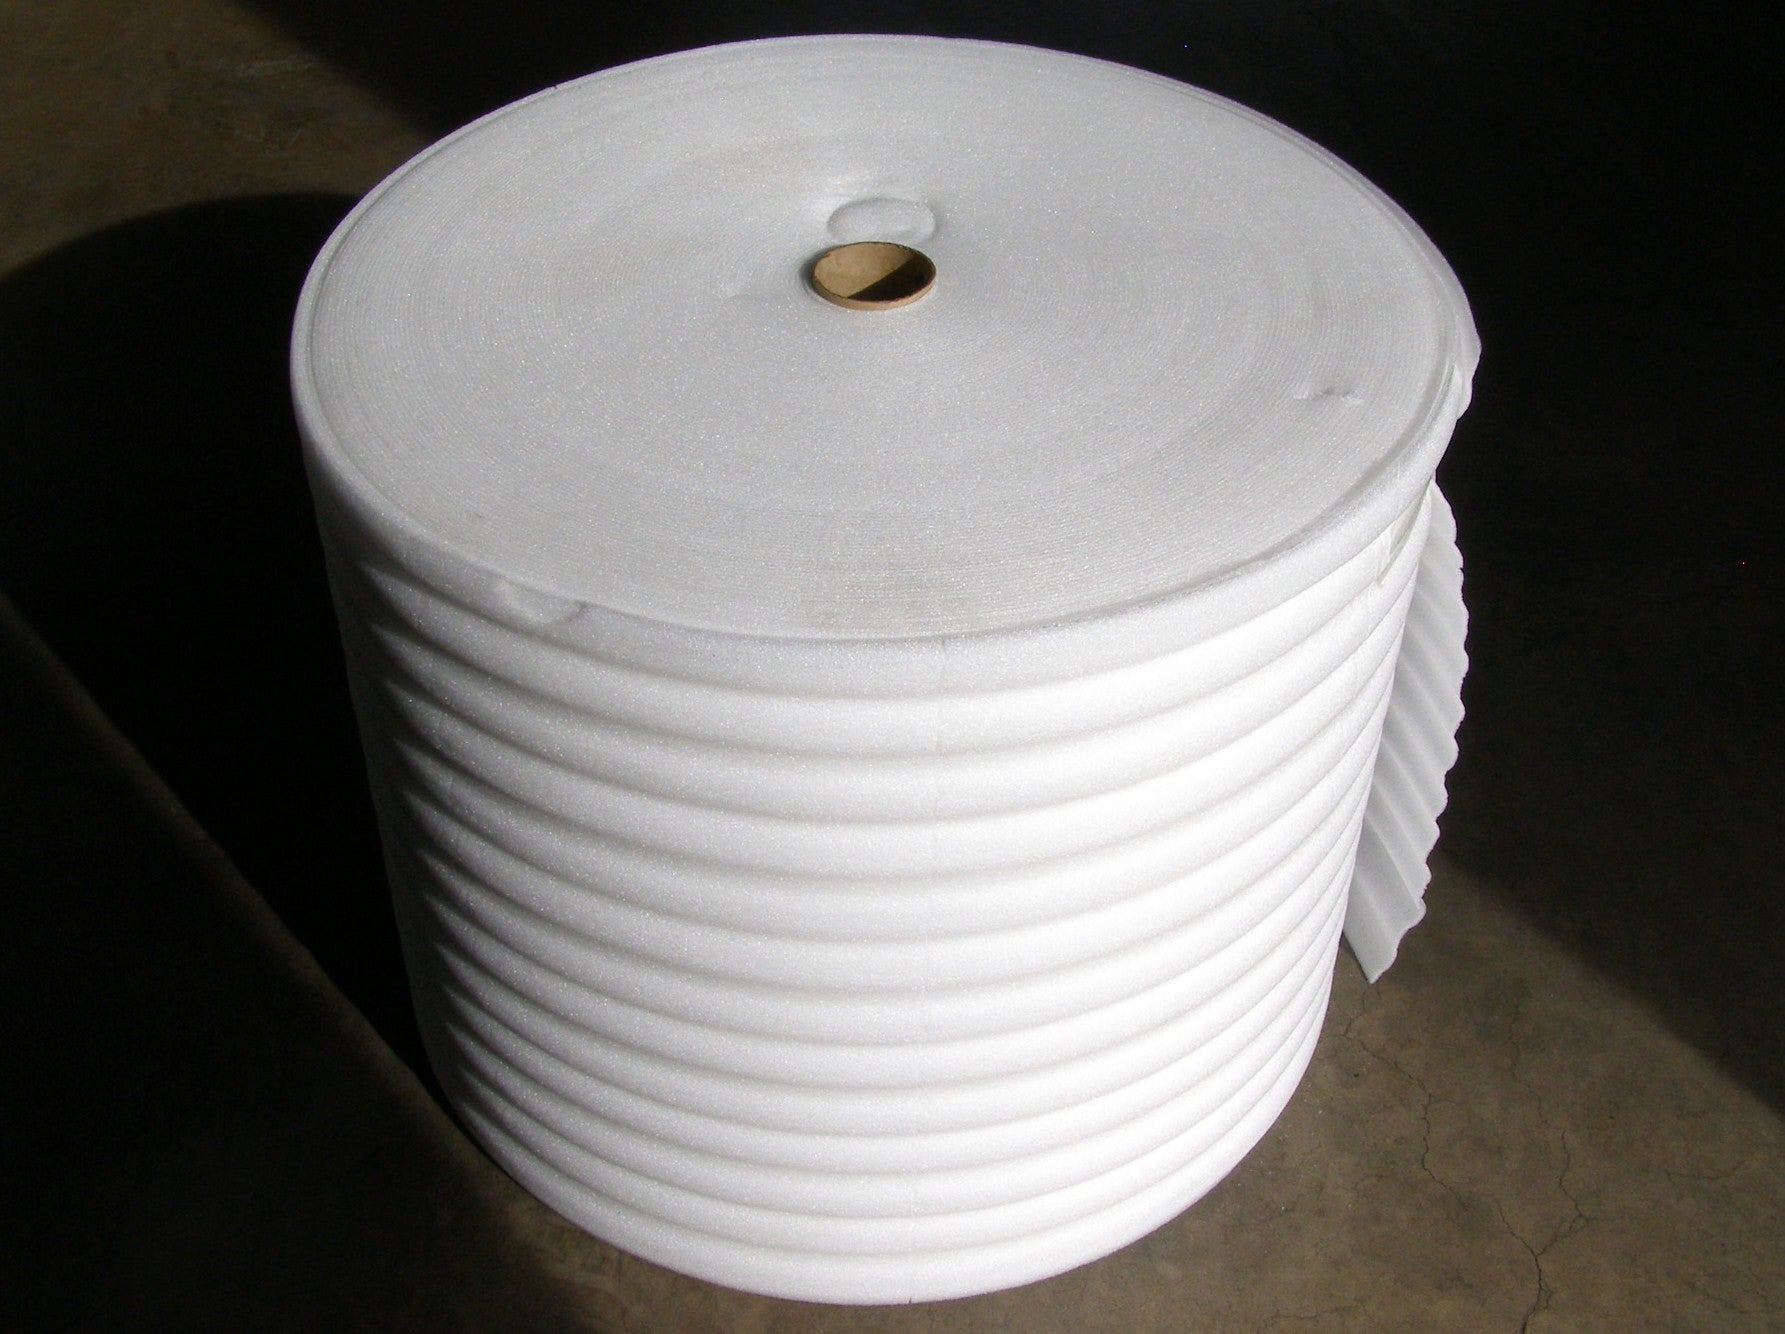 Need Cushion? Use Polyethylene Packing Foam - Jamestown Container